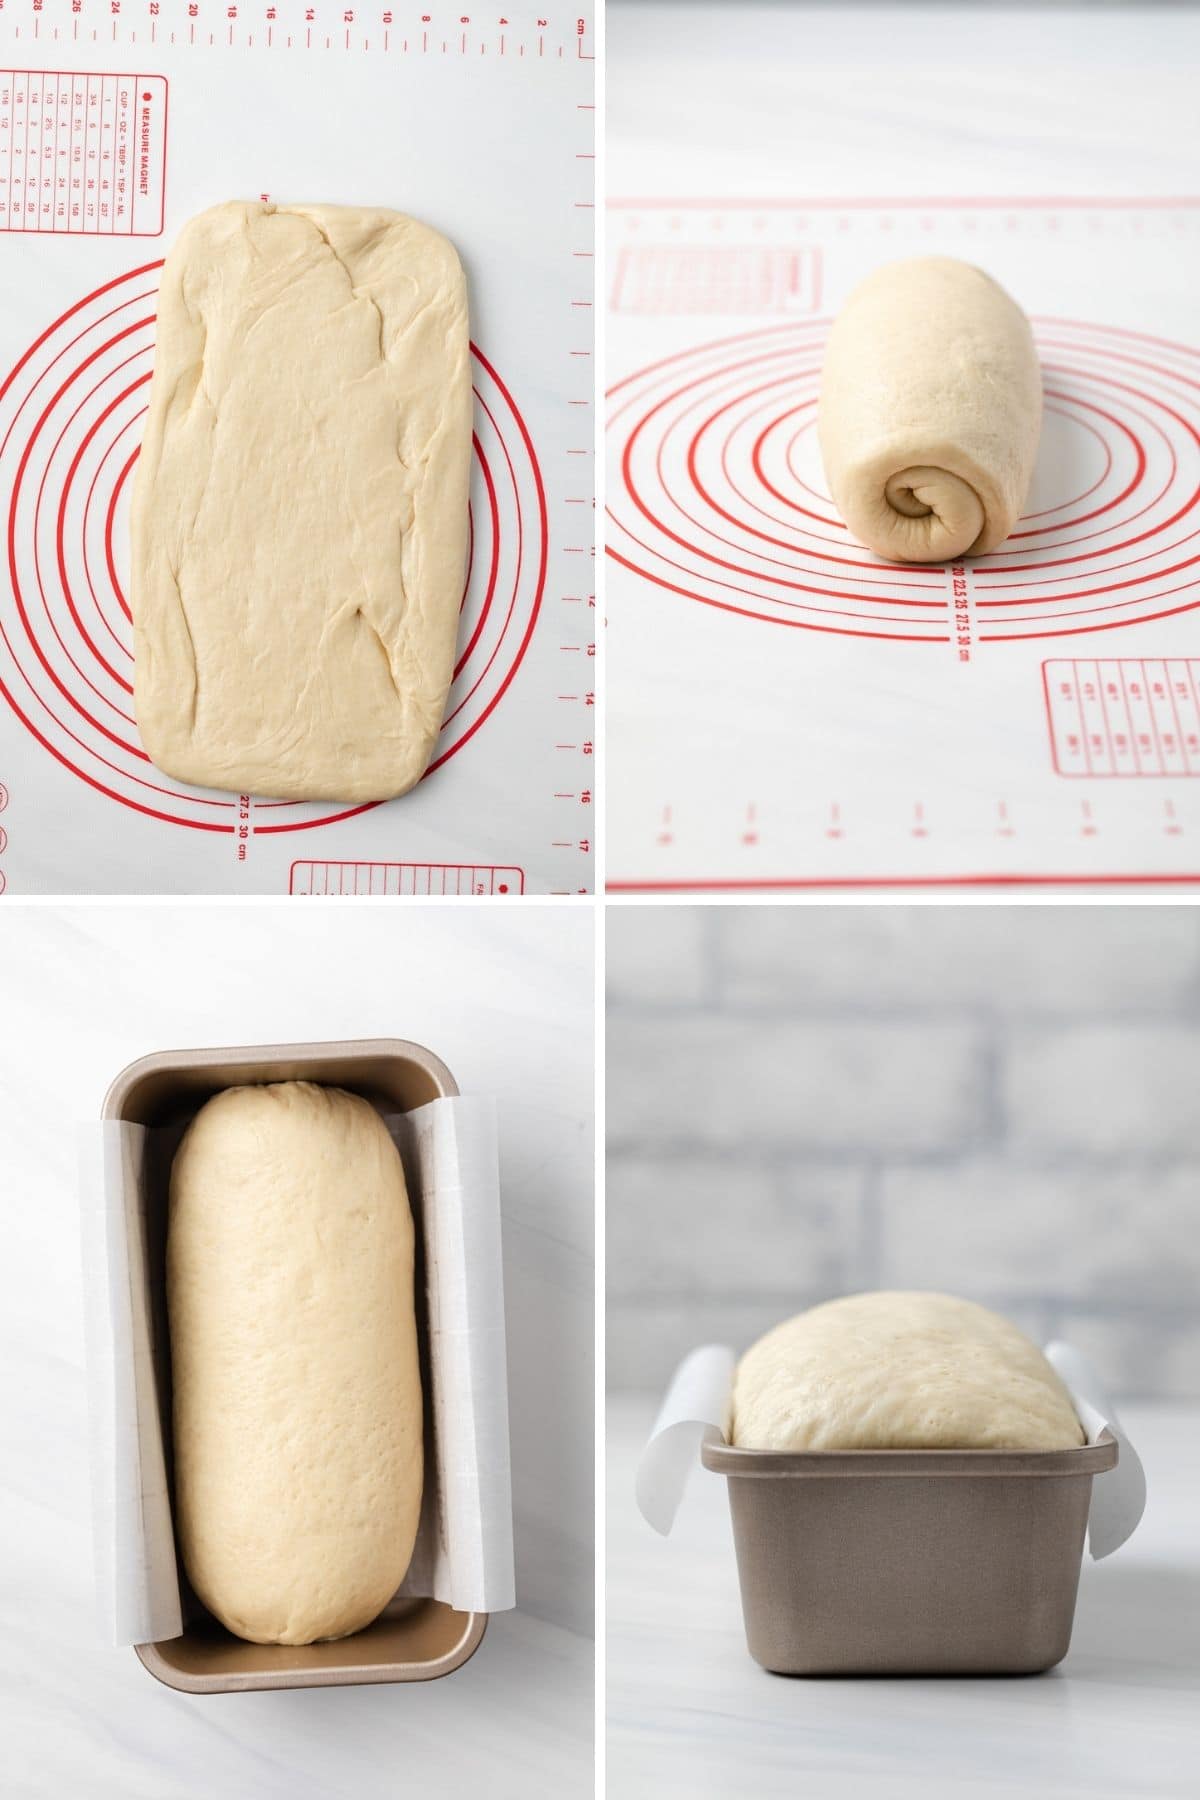 process shots showing dough patted into rectangle then rolled and shaped into a loaf, loaf placed in bread pan and proofed loaf in bread pan